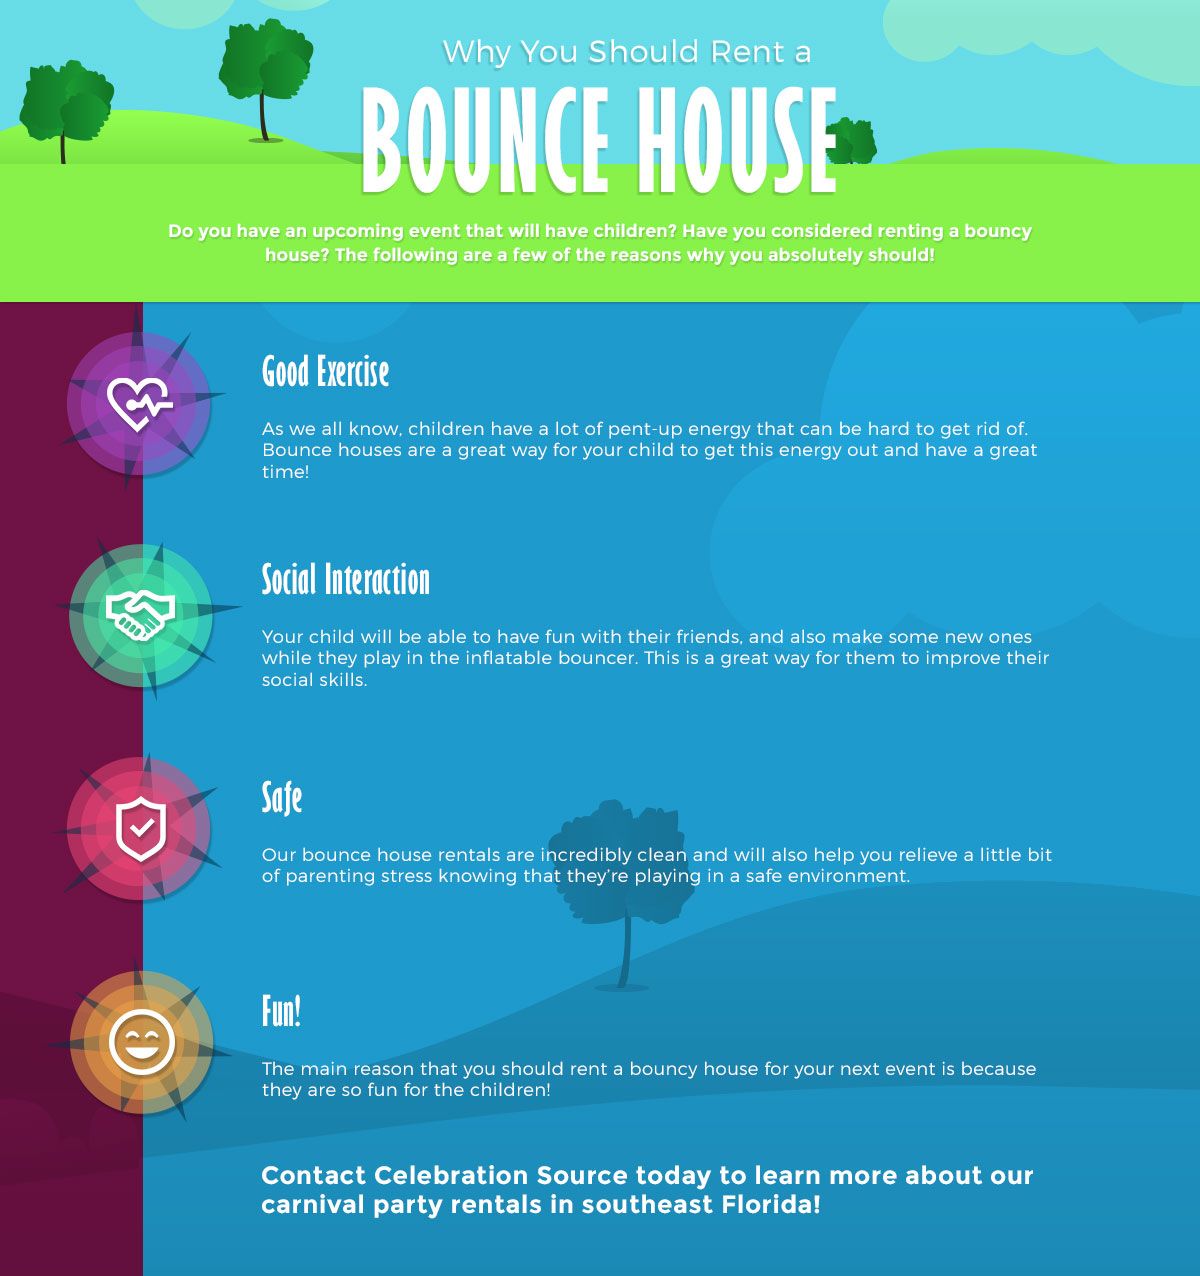 rentabouncehouse-infographic-5caf950b6684a.jpg